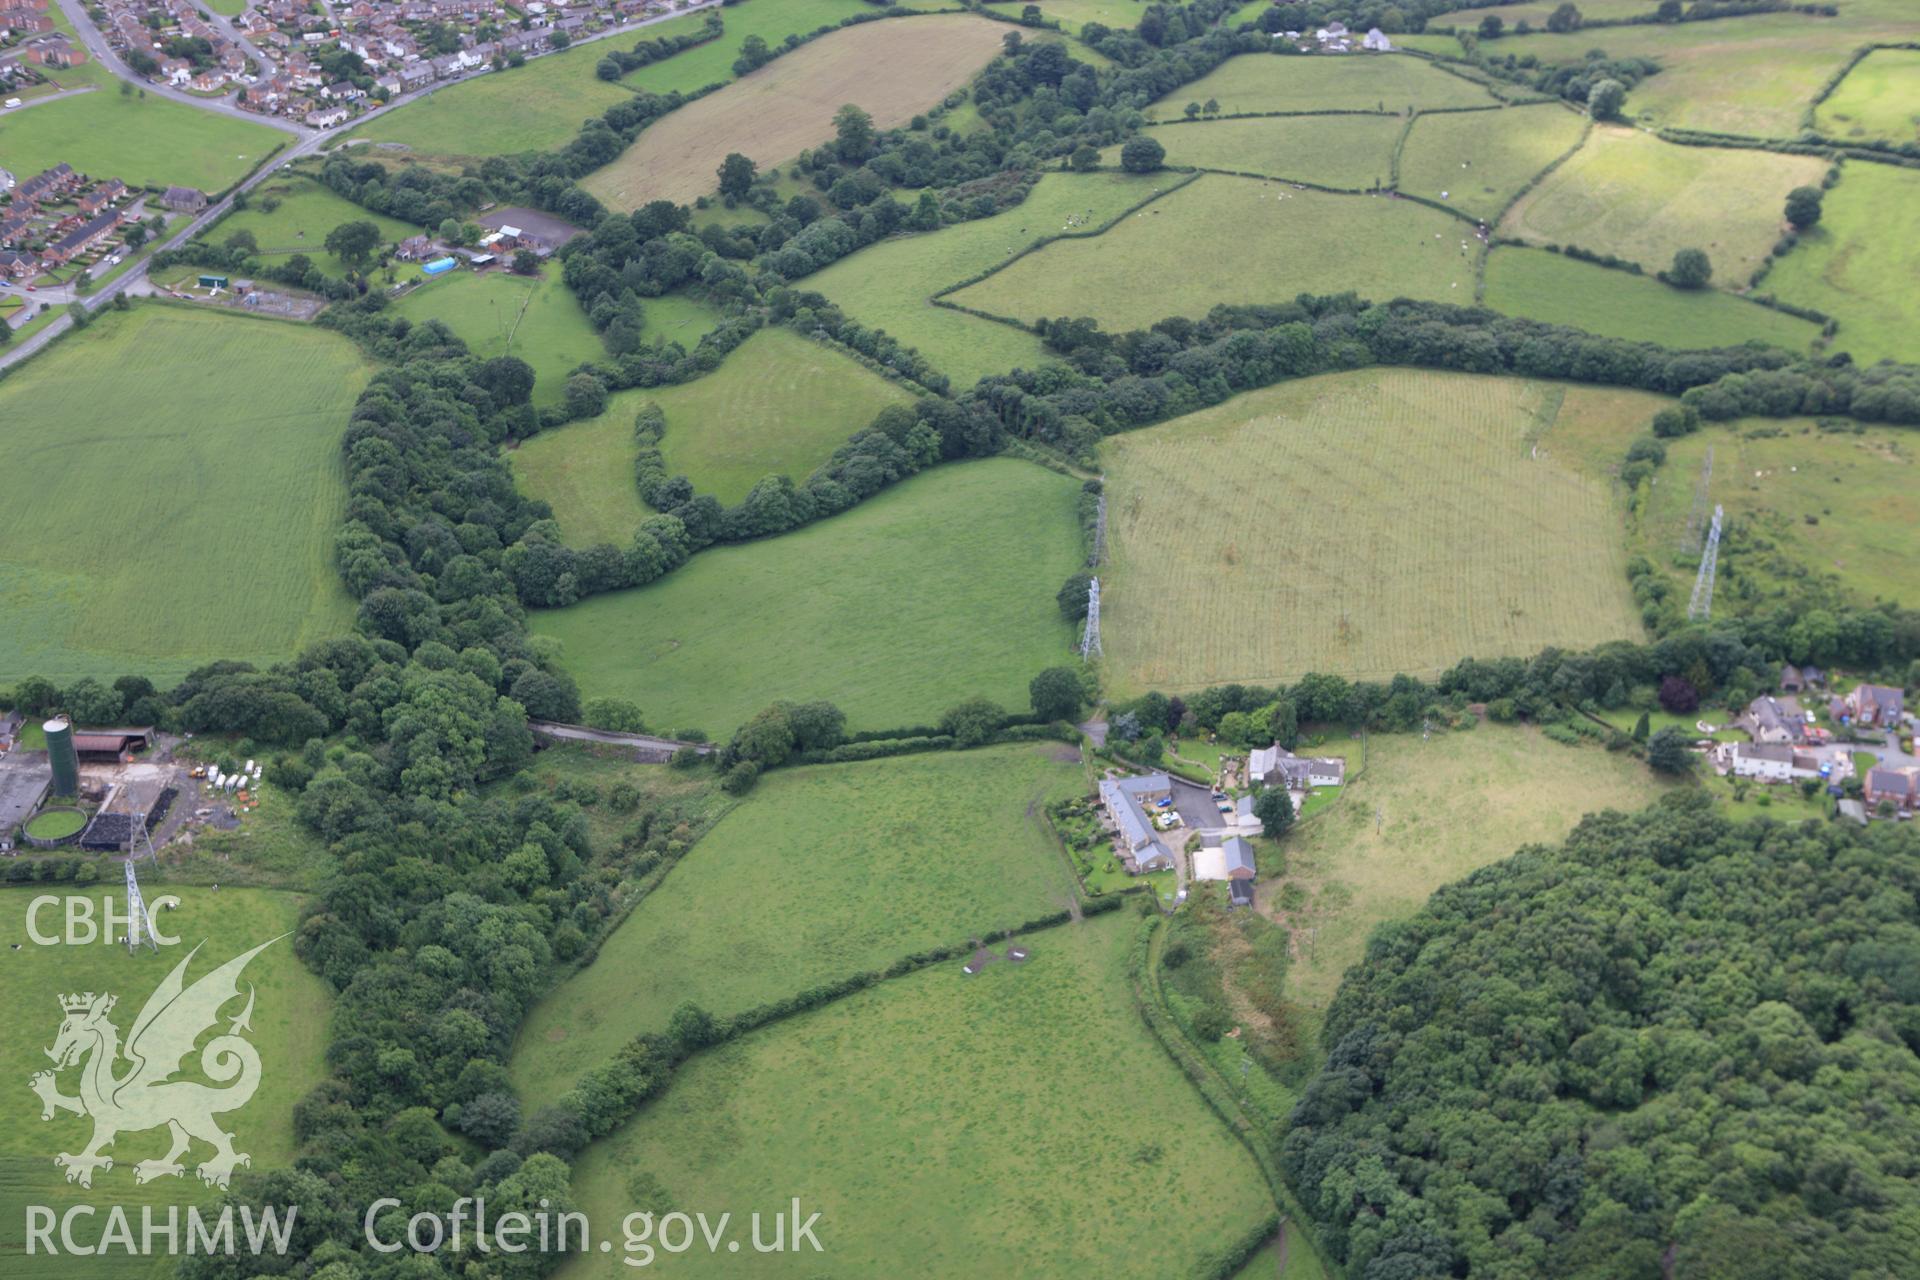 RCAHMW colour oblique aerial photograph of a section of Offa's Dyke at Vron. Taken on 08 July 2009 by Toby Driver